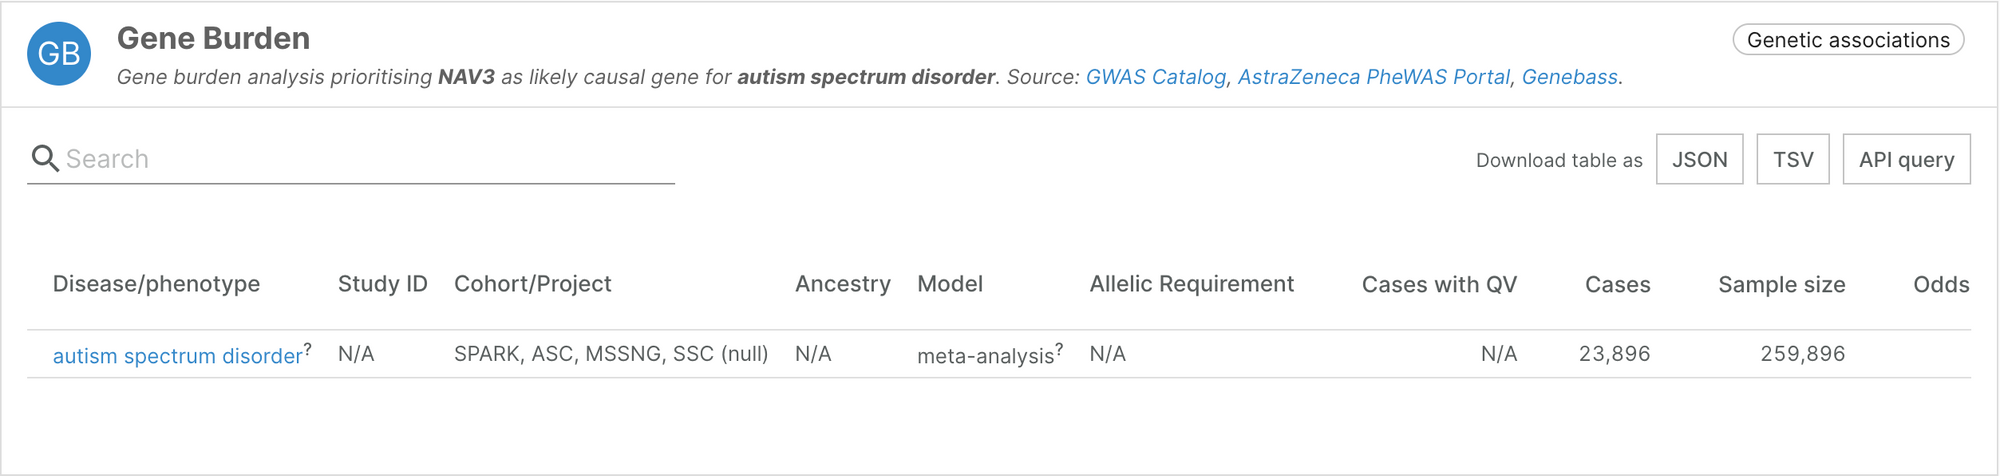 The gene burden widget shows one row for evidence associating NAV3 and autism spectrum disorder.